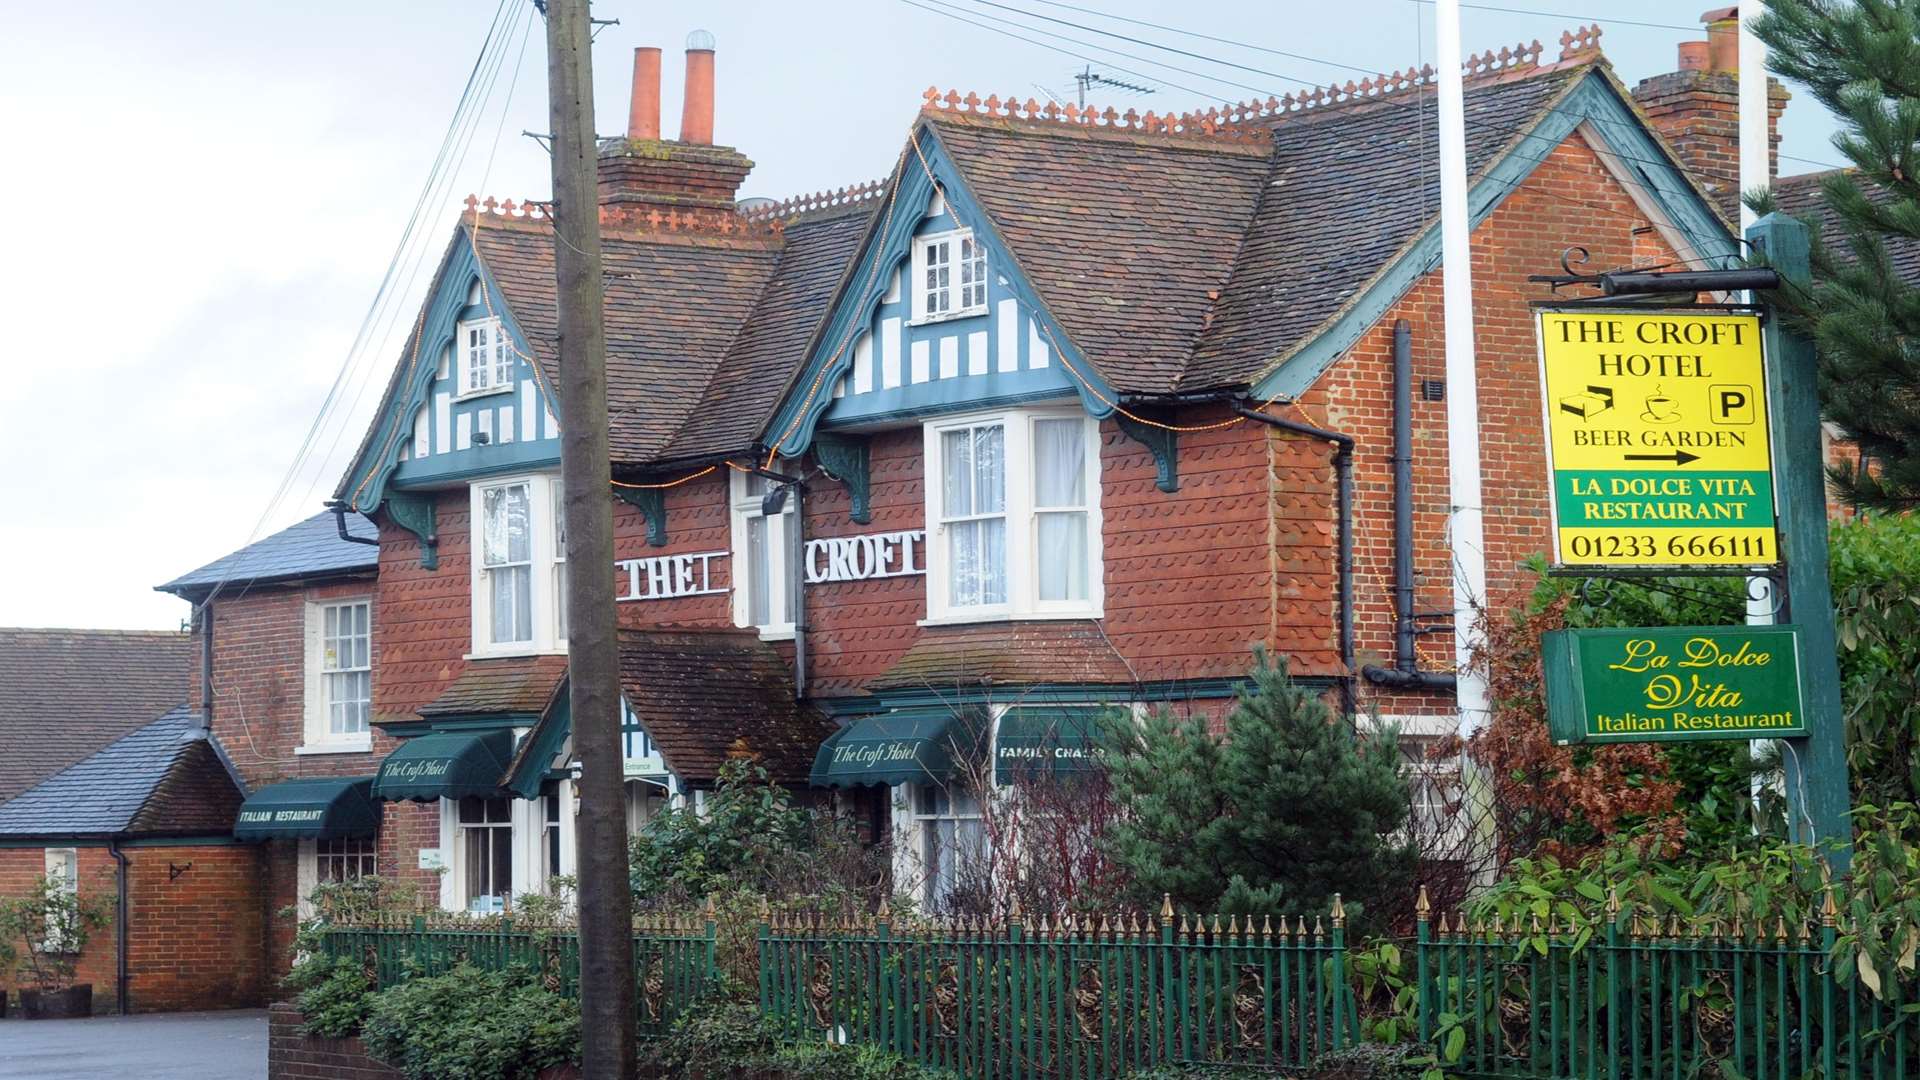 Plans to demolish The Croft hotel have been turned down